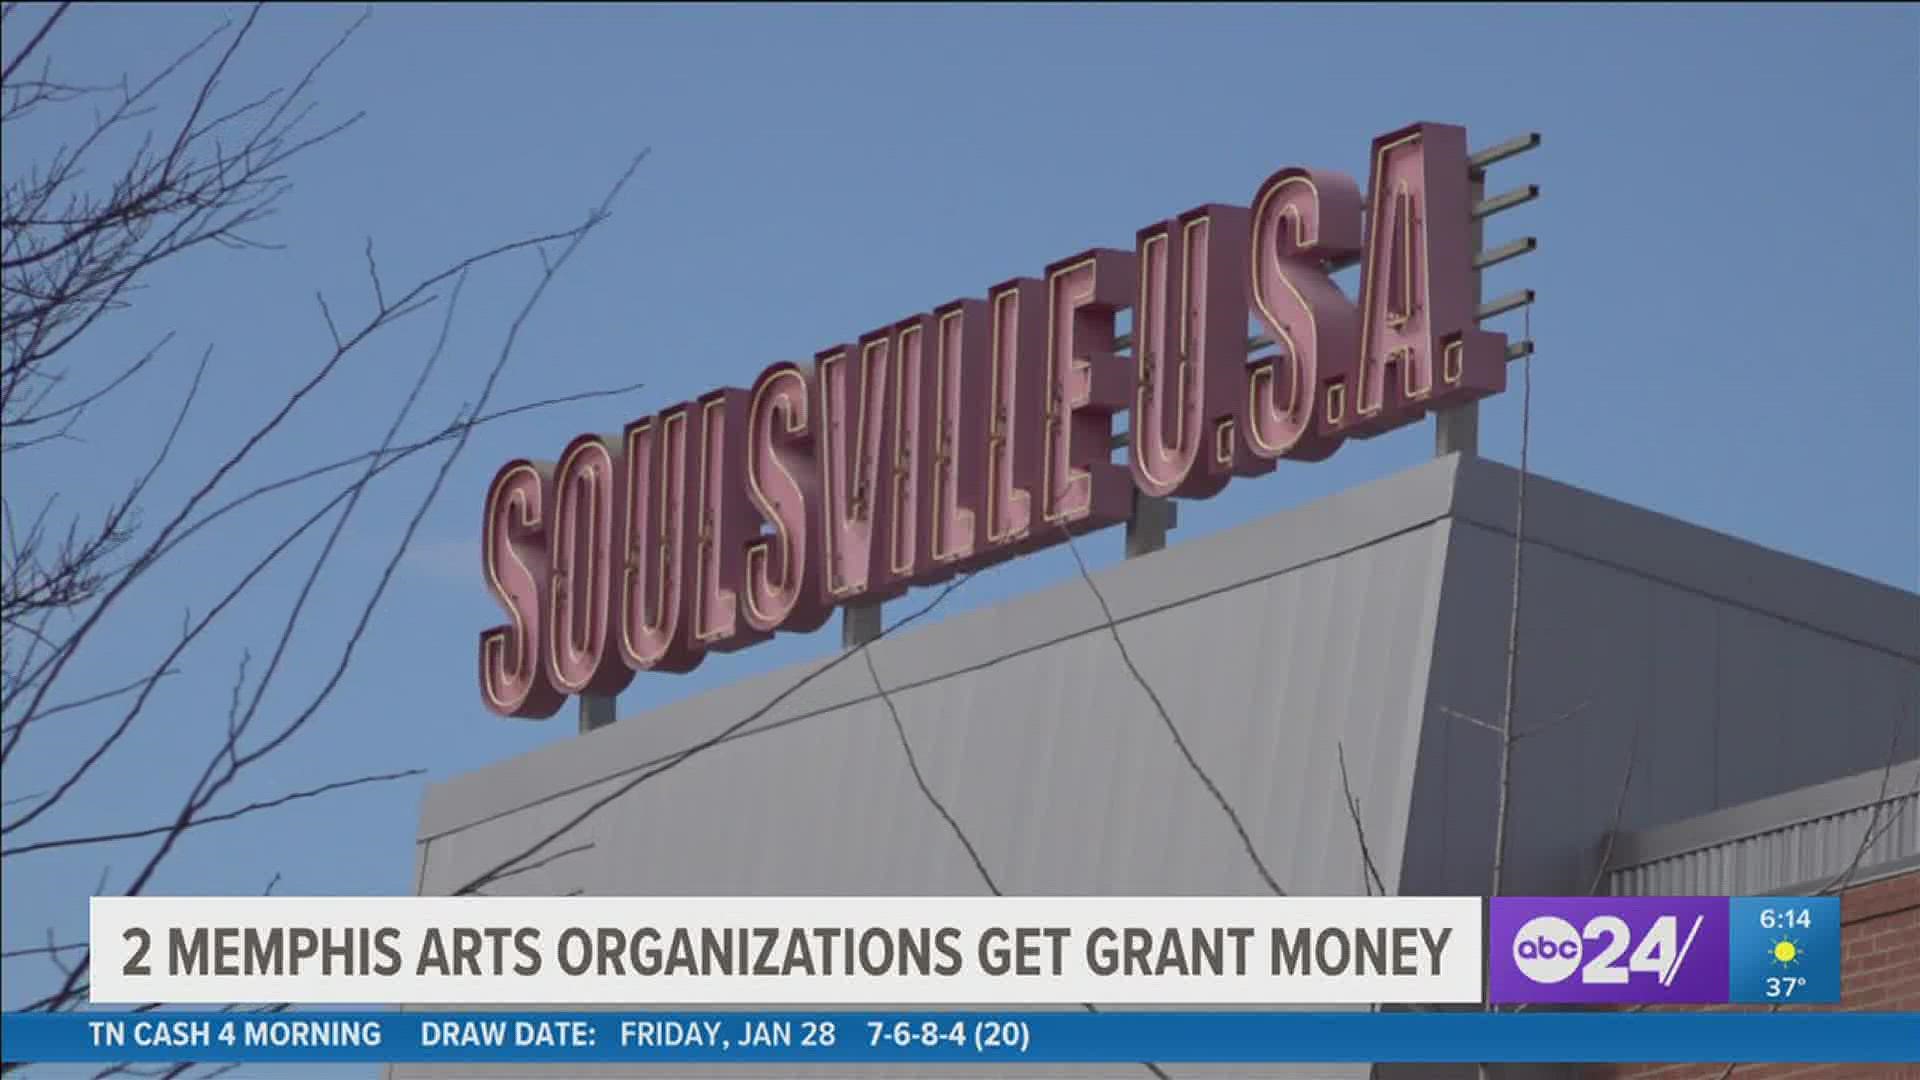 The Blues City Cultural Center and Soulsville Foundation will use the money to further their programming.